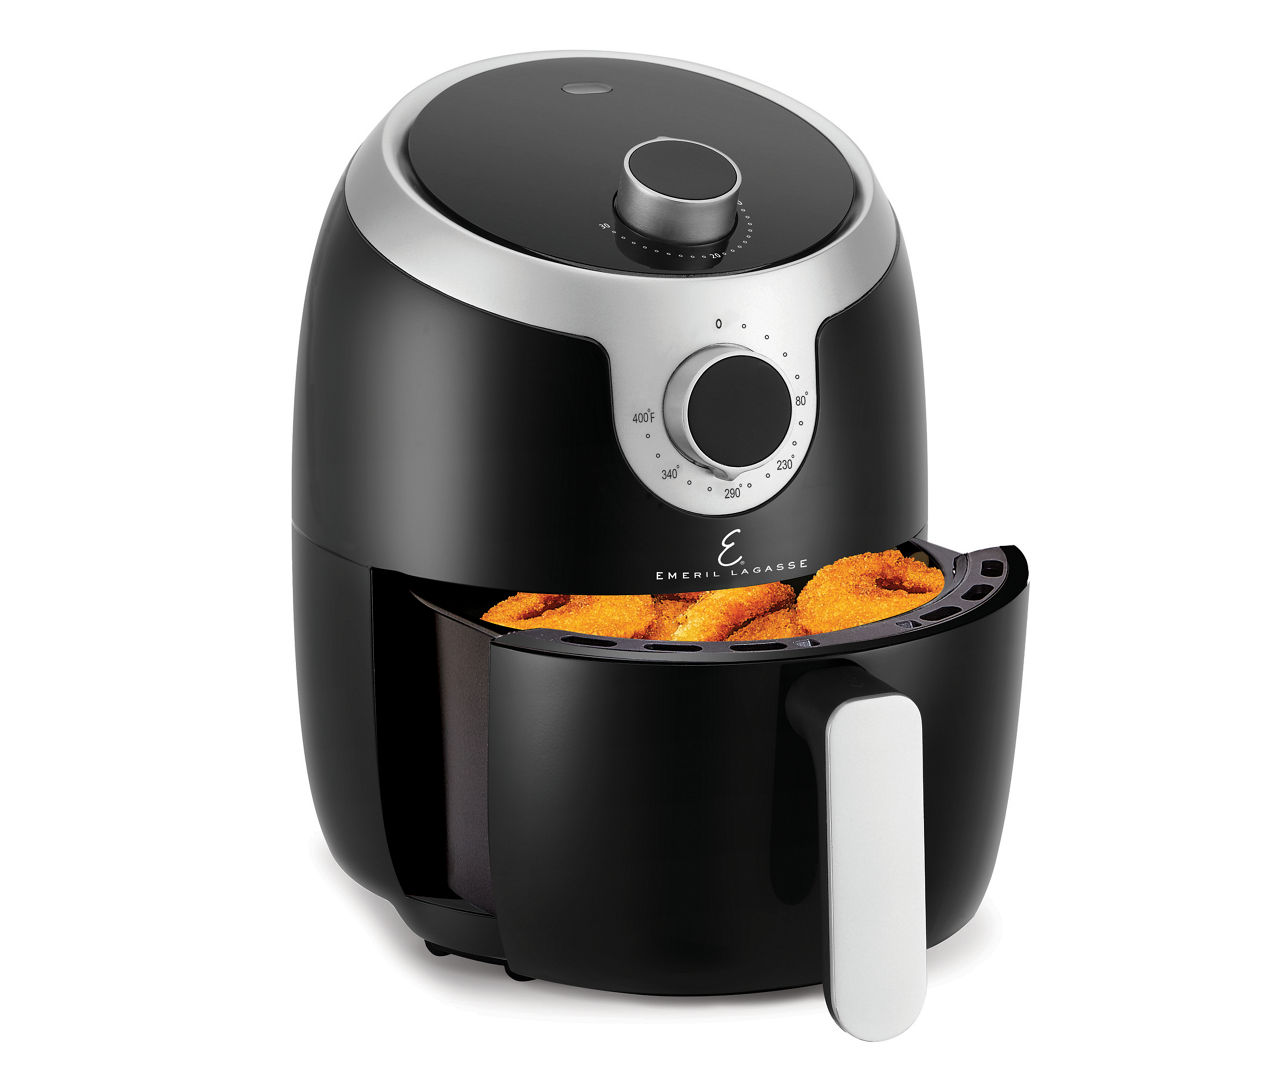 Emeril Lagasse's Extra Large Air Fryer